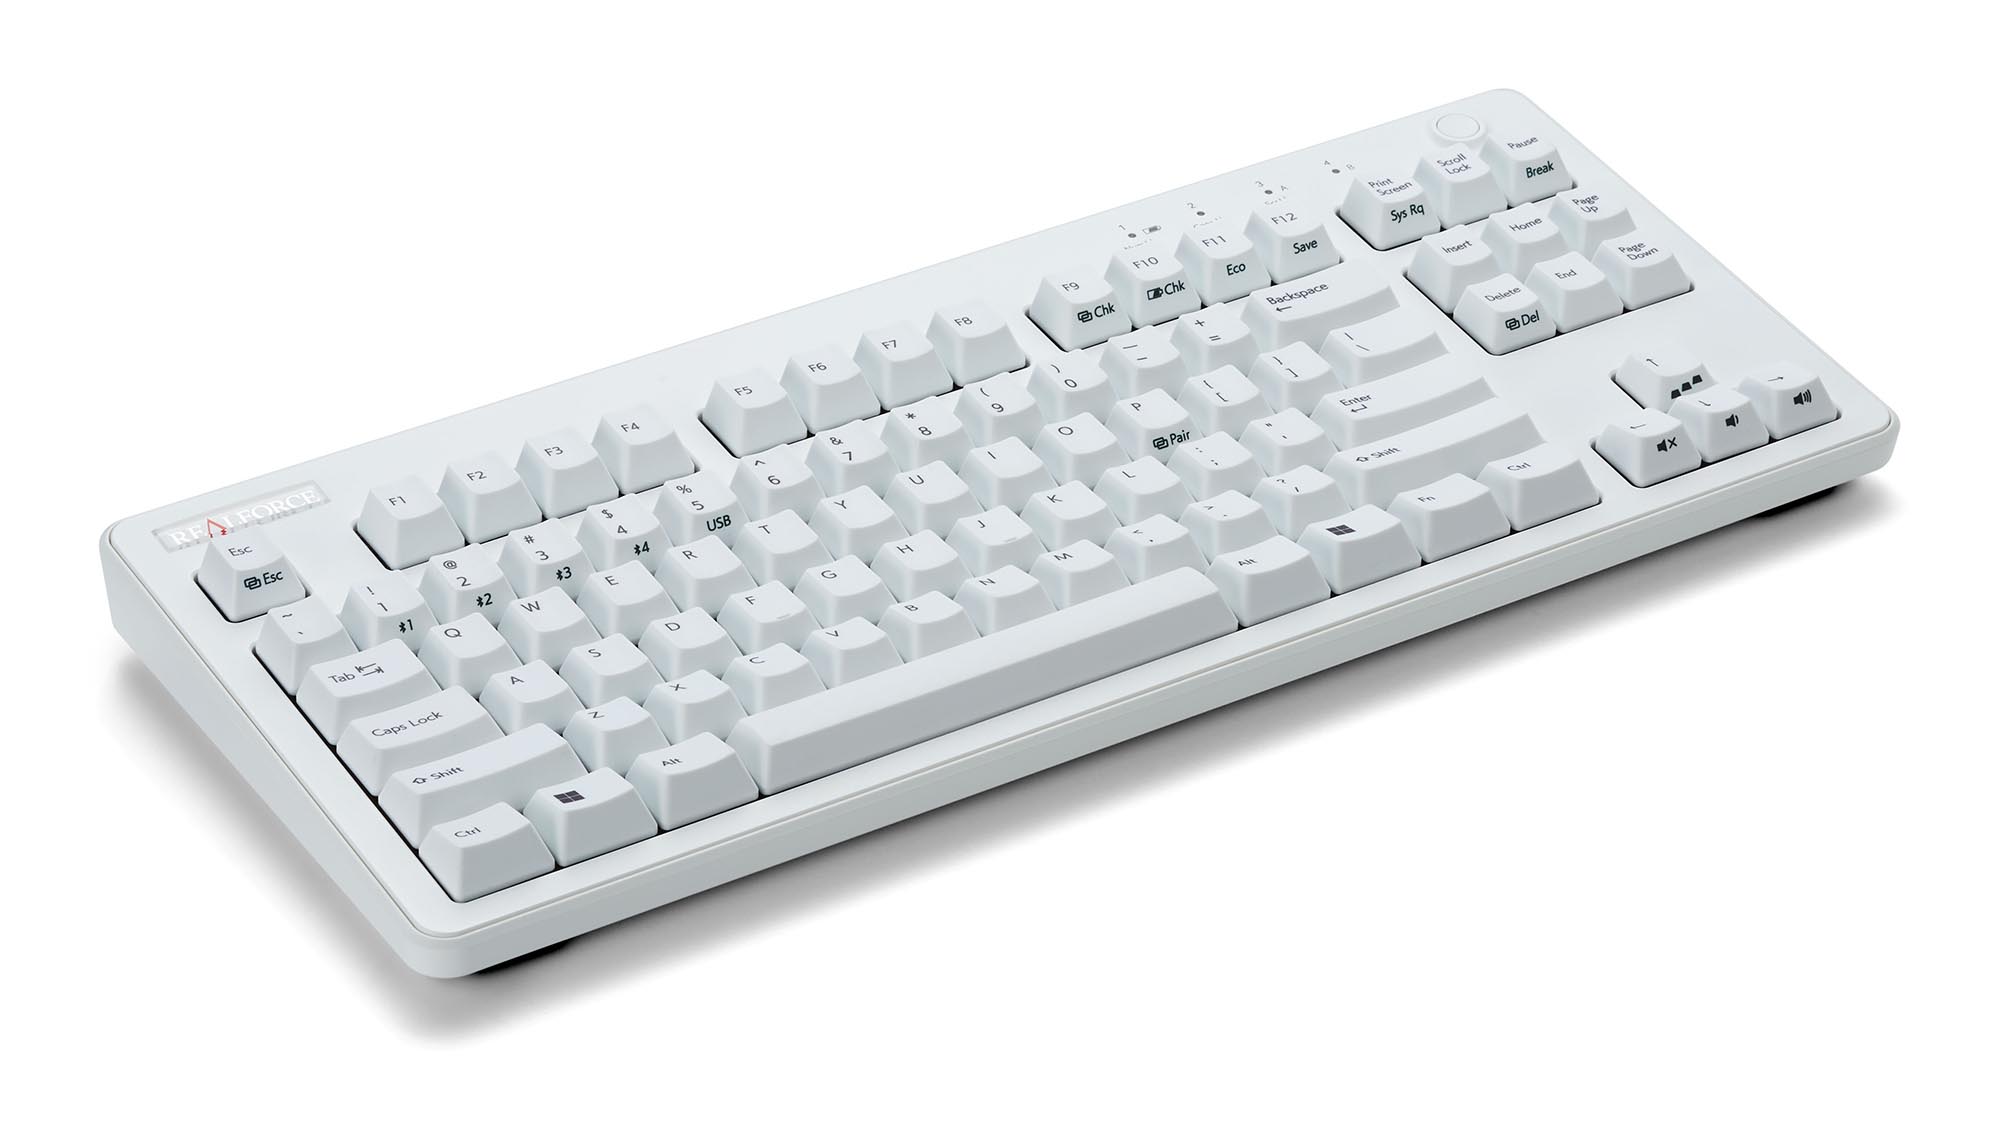 REALFORCE R3HF11 東プレ 無線キーボード 英字配列-